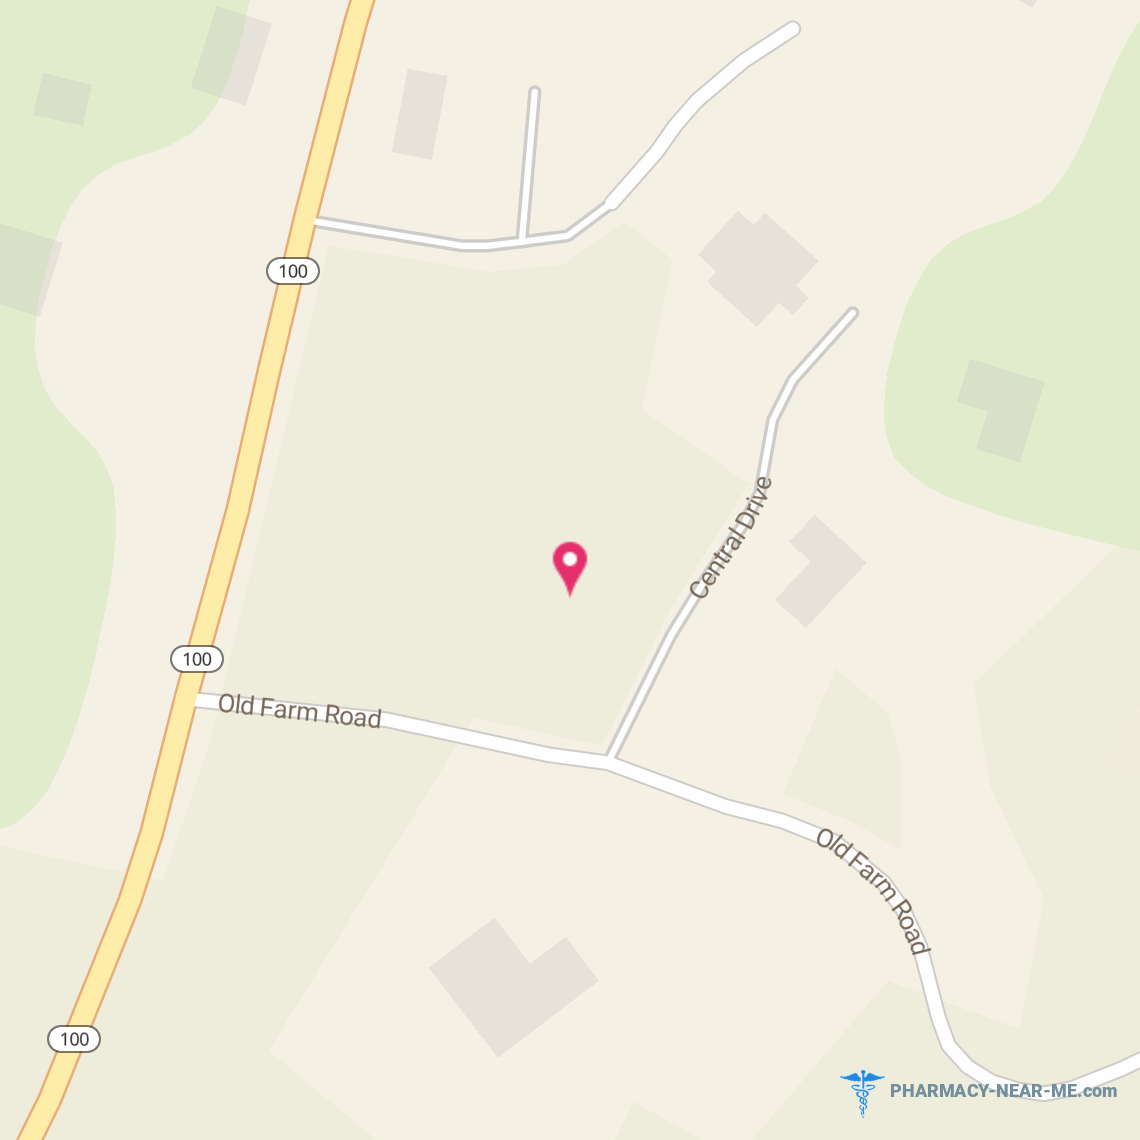 MOUNTAINSIDE PHARMACY INC - Pharmacy Hours, Phone, Reviews & Information: 45 Old Farm Road, Stowe, Vermont 05672, United States